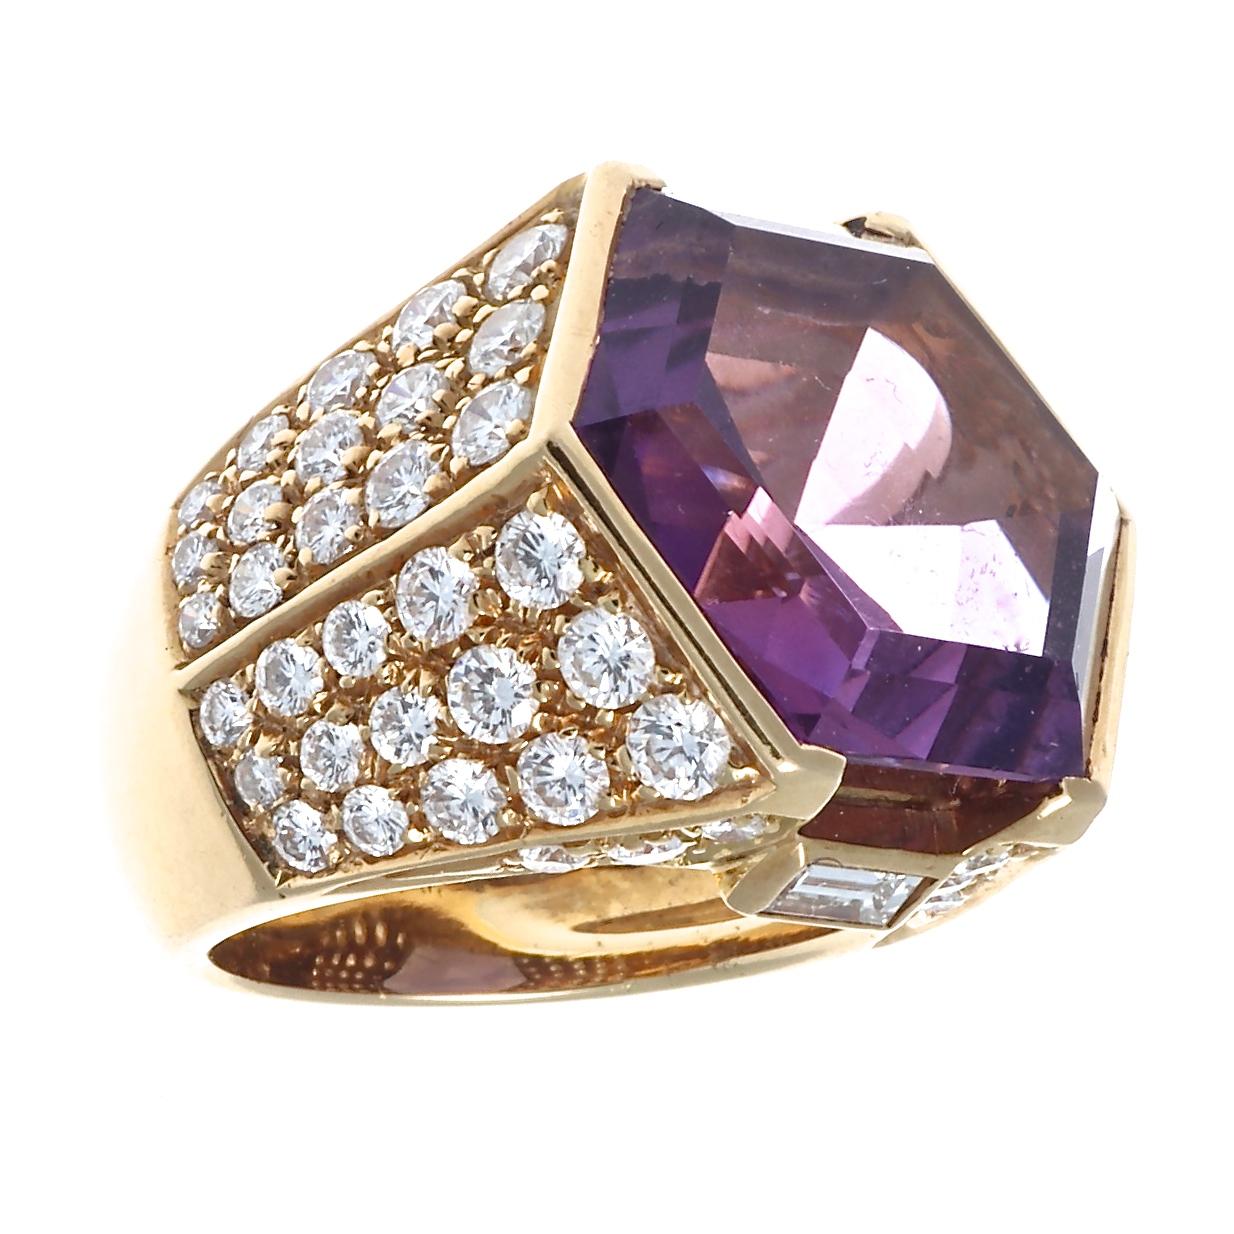 Captivating 1970's amethyst diamond ring. Featuring a beautifully faceted hexagonal amethyst weighing approximately 18 carats. There are a total of 72 round brilliant diamonds and 2 baguette cut diamonds on the ring shank, with a total approximate